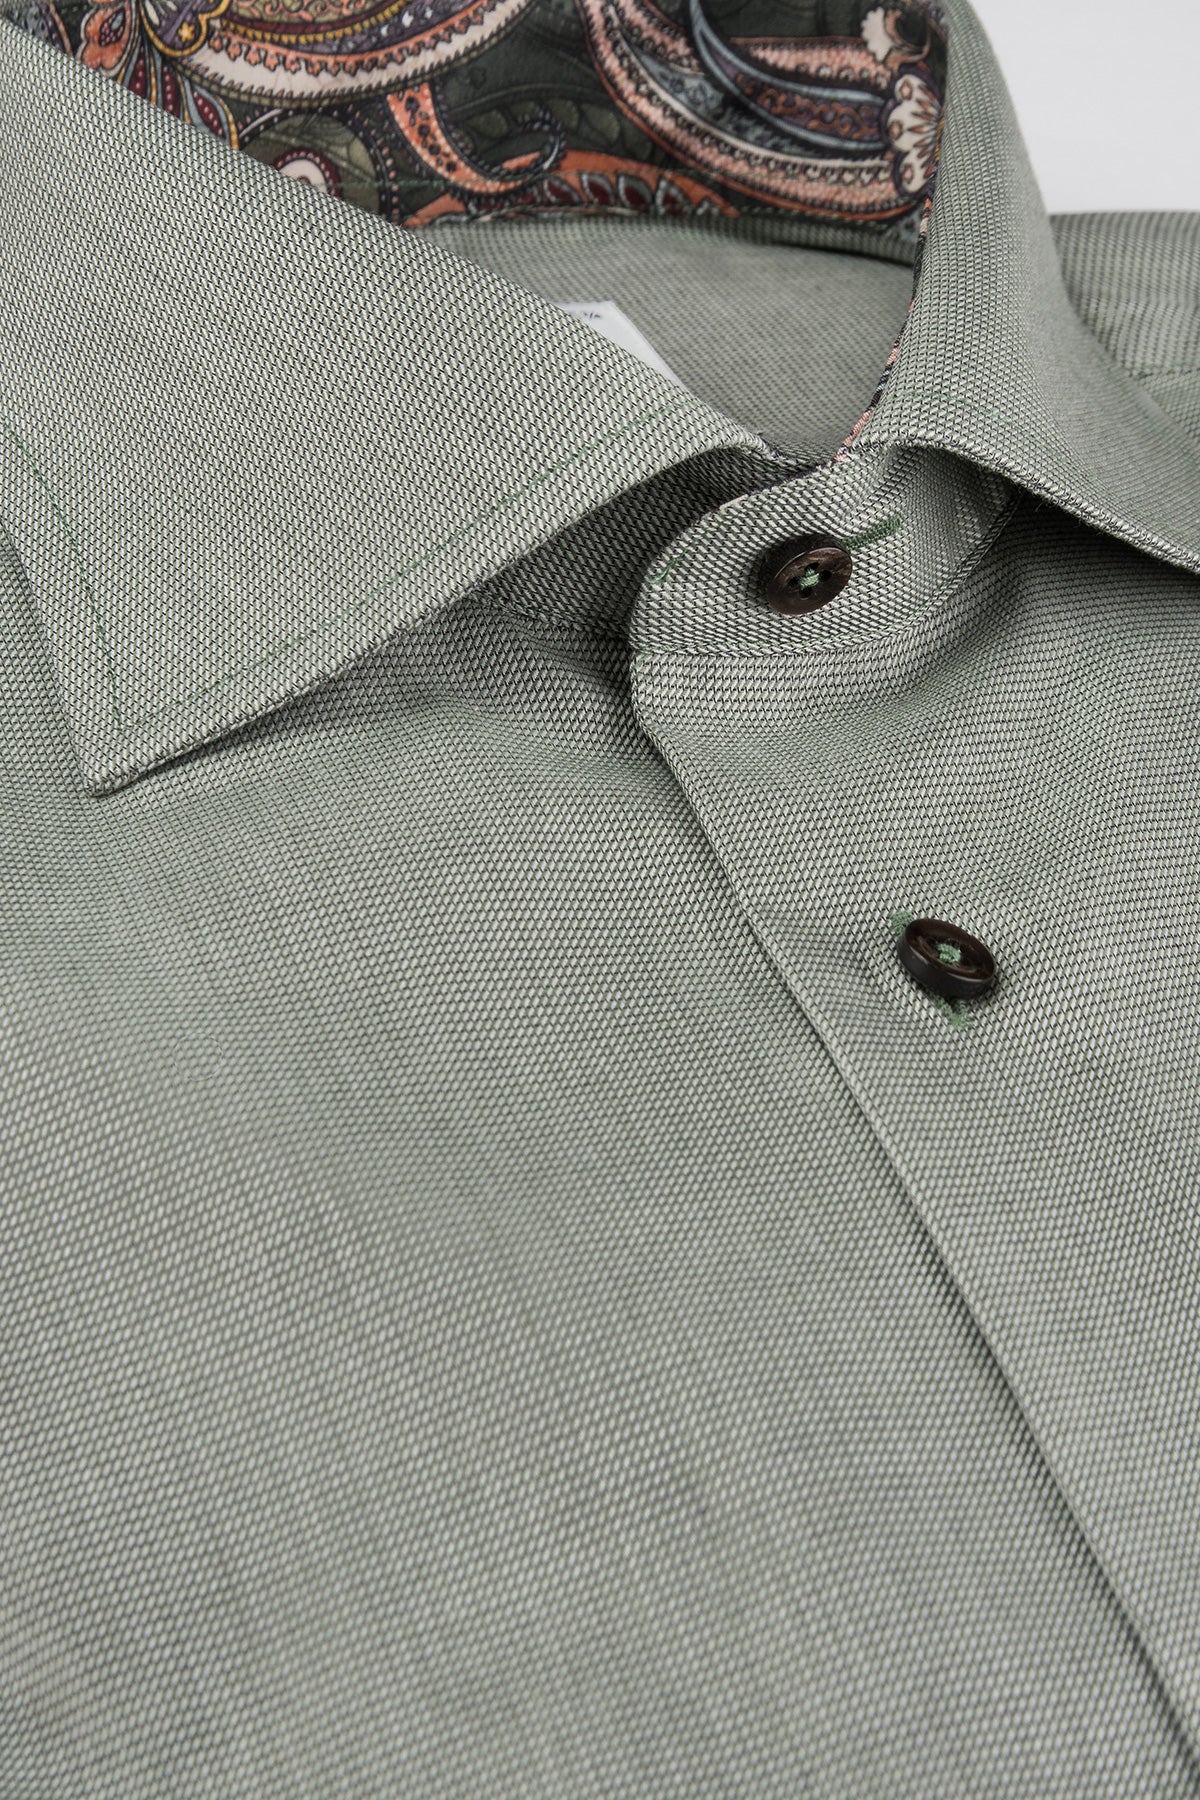 Green regular fit shirt with contrast details